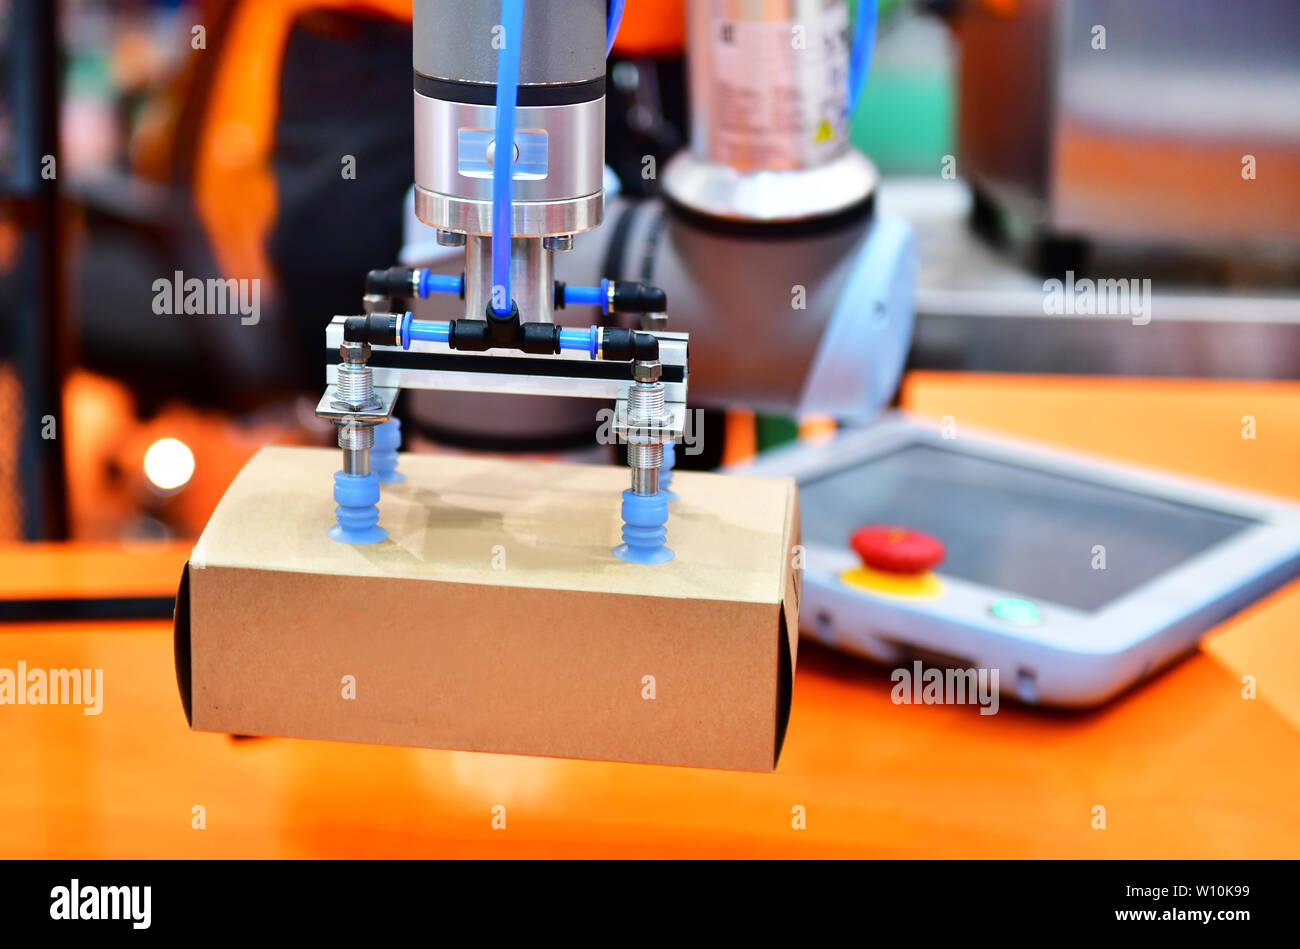 Robot arm arranged product box on Automatic industrial machinery equipment in production line factory Stock Photo